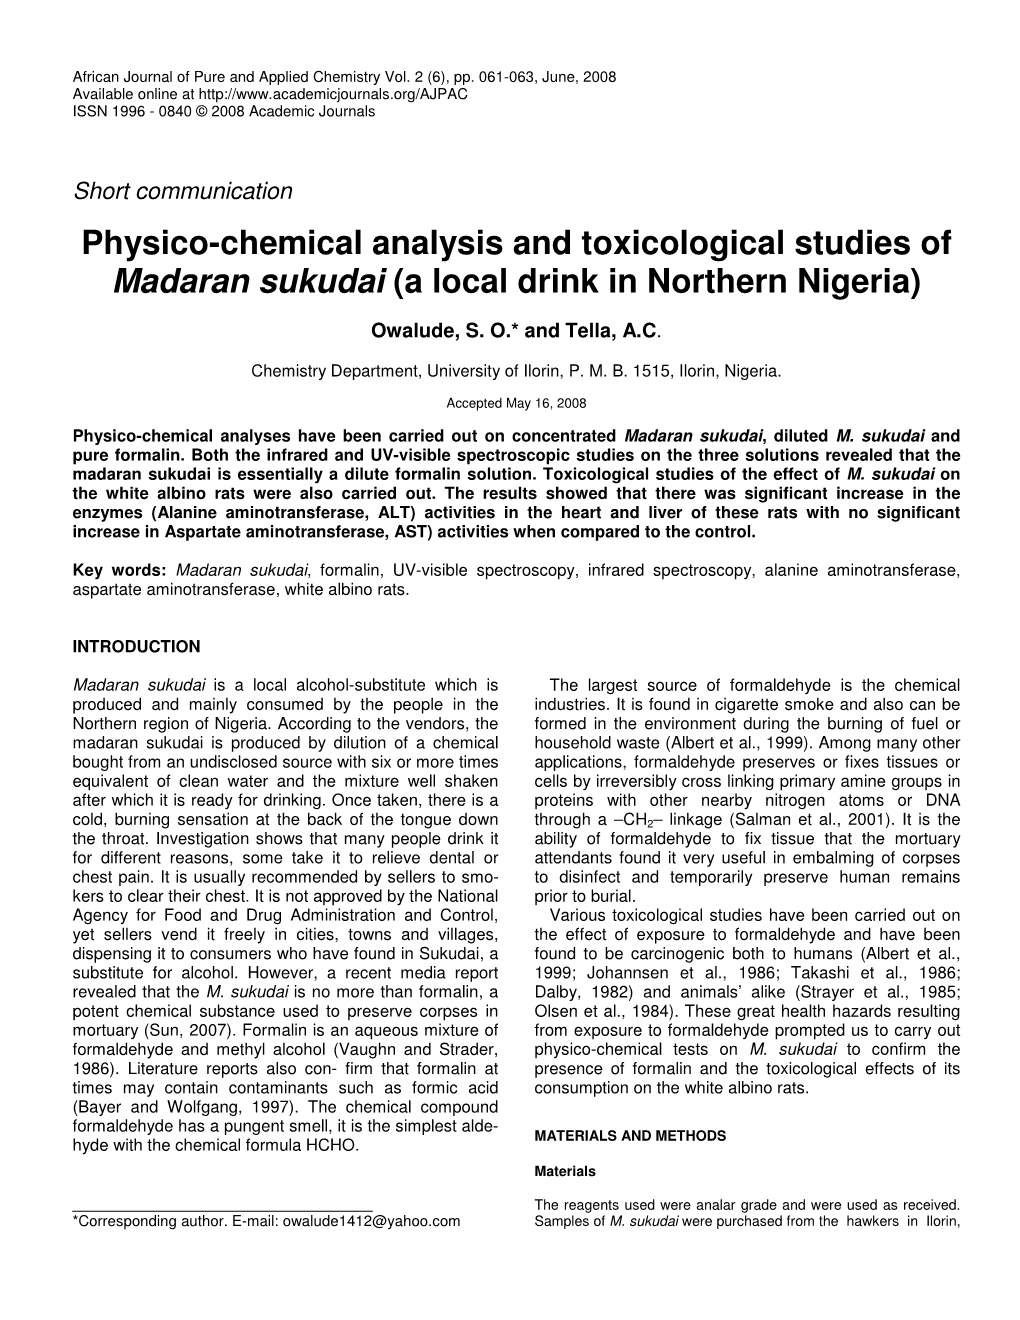 Physico-Chemical Analysis and Toxicological Studies of Madaran Sukudai (A Local Drink in Northern Nigeria)